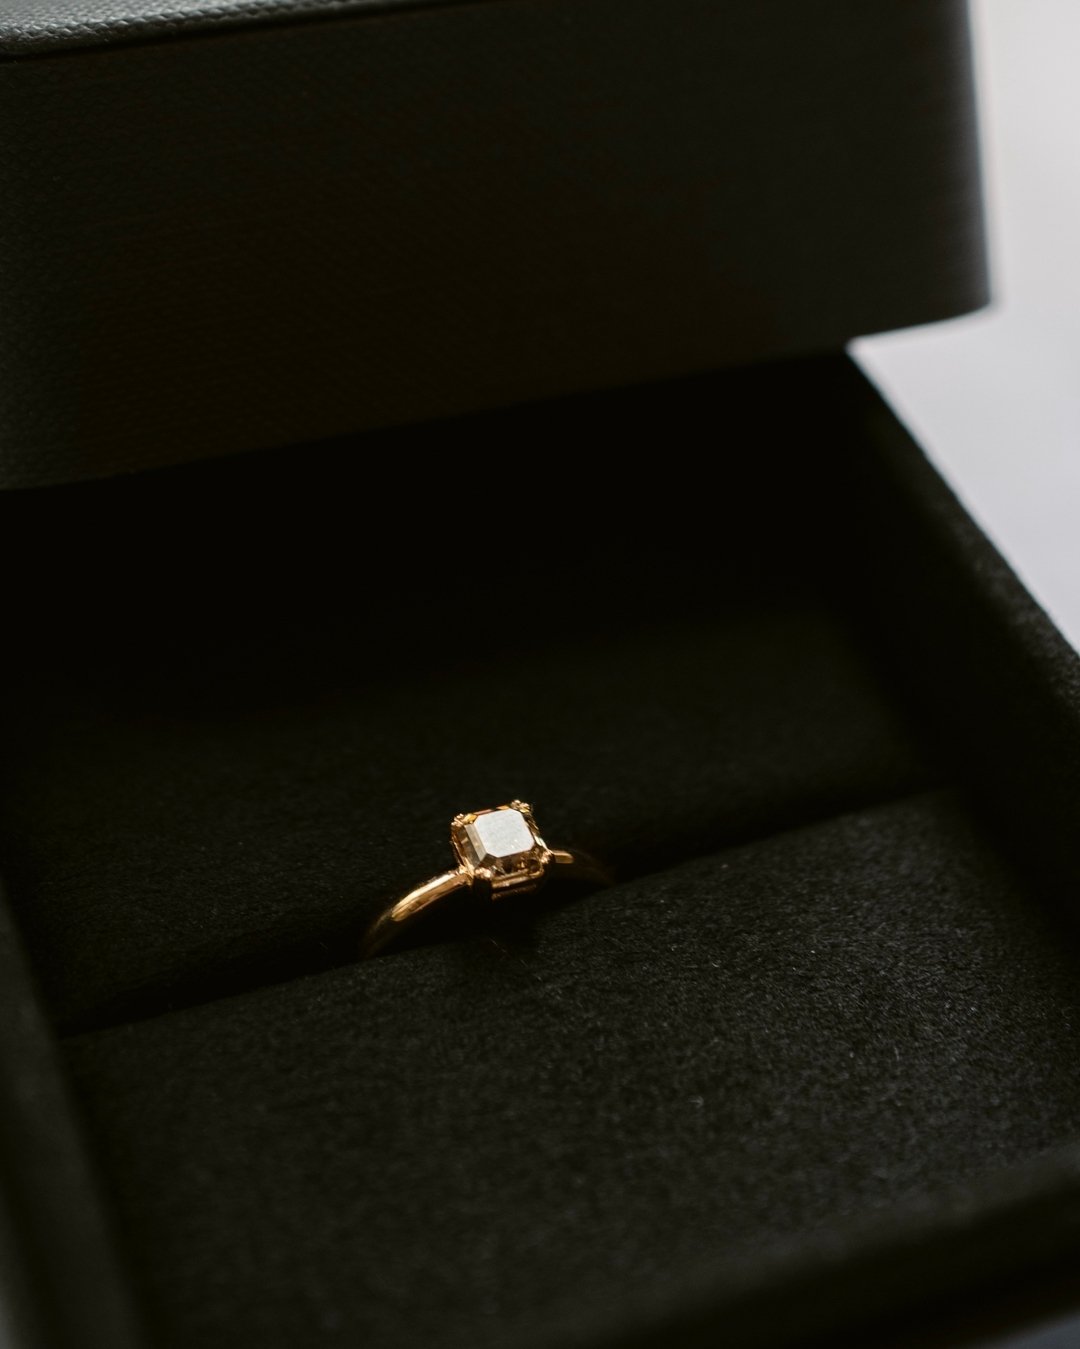 As a photographer, I often find beauty in the details that might be overlooked. 👀

This ring, with its meticulous craftsmanship and radiant sparkle, caught my eye. Each angle offers a new perspective, each glimmer a different story.

One privilege o